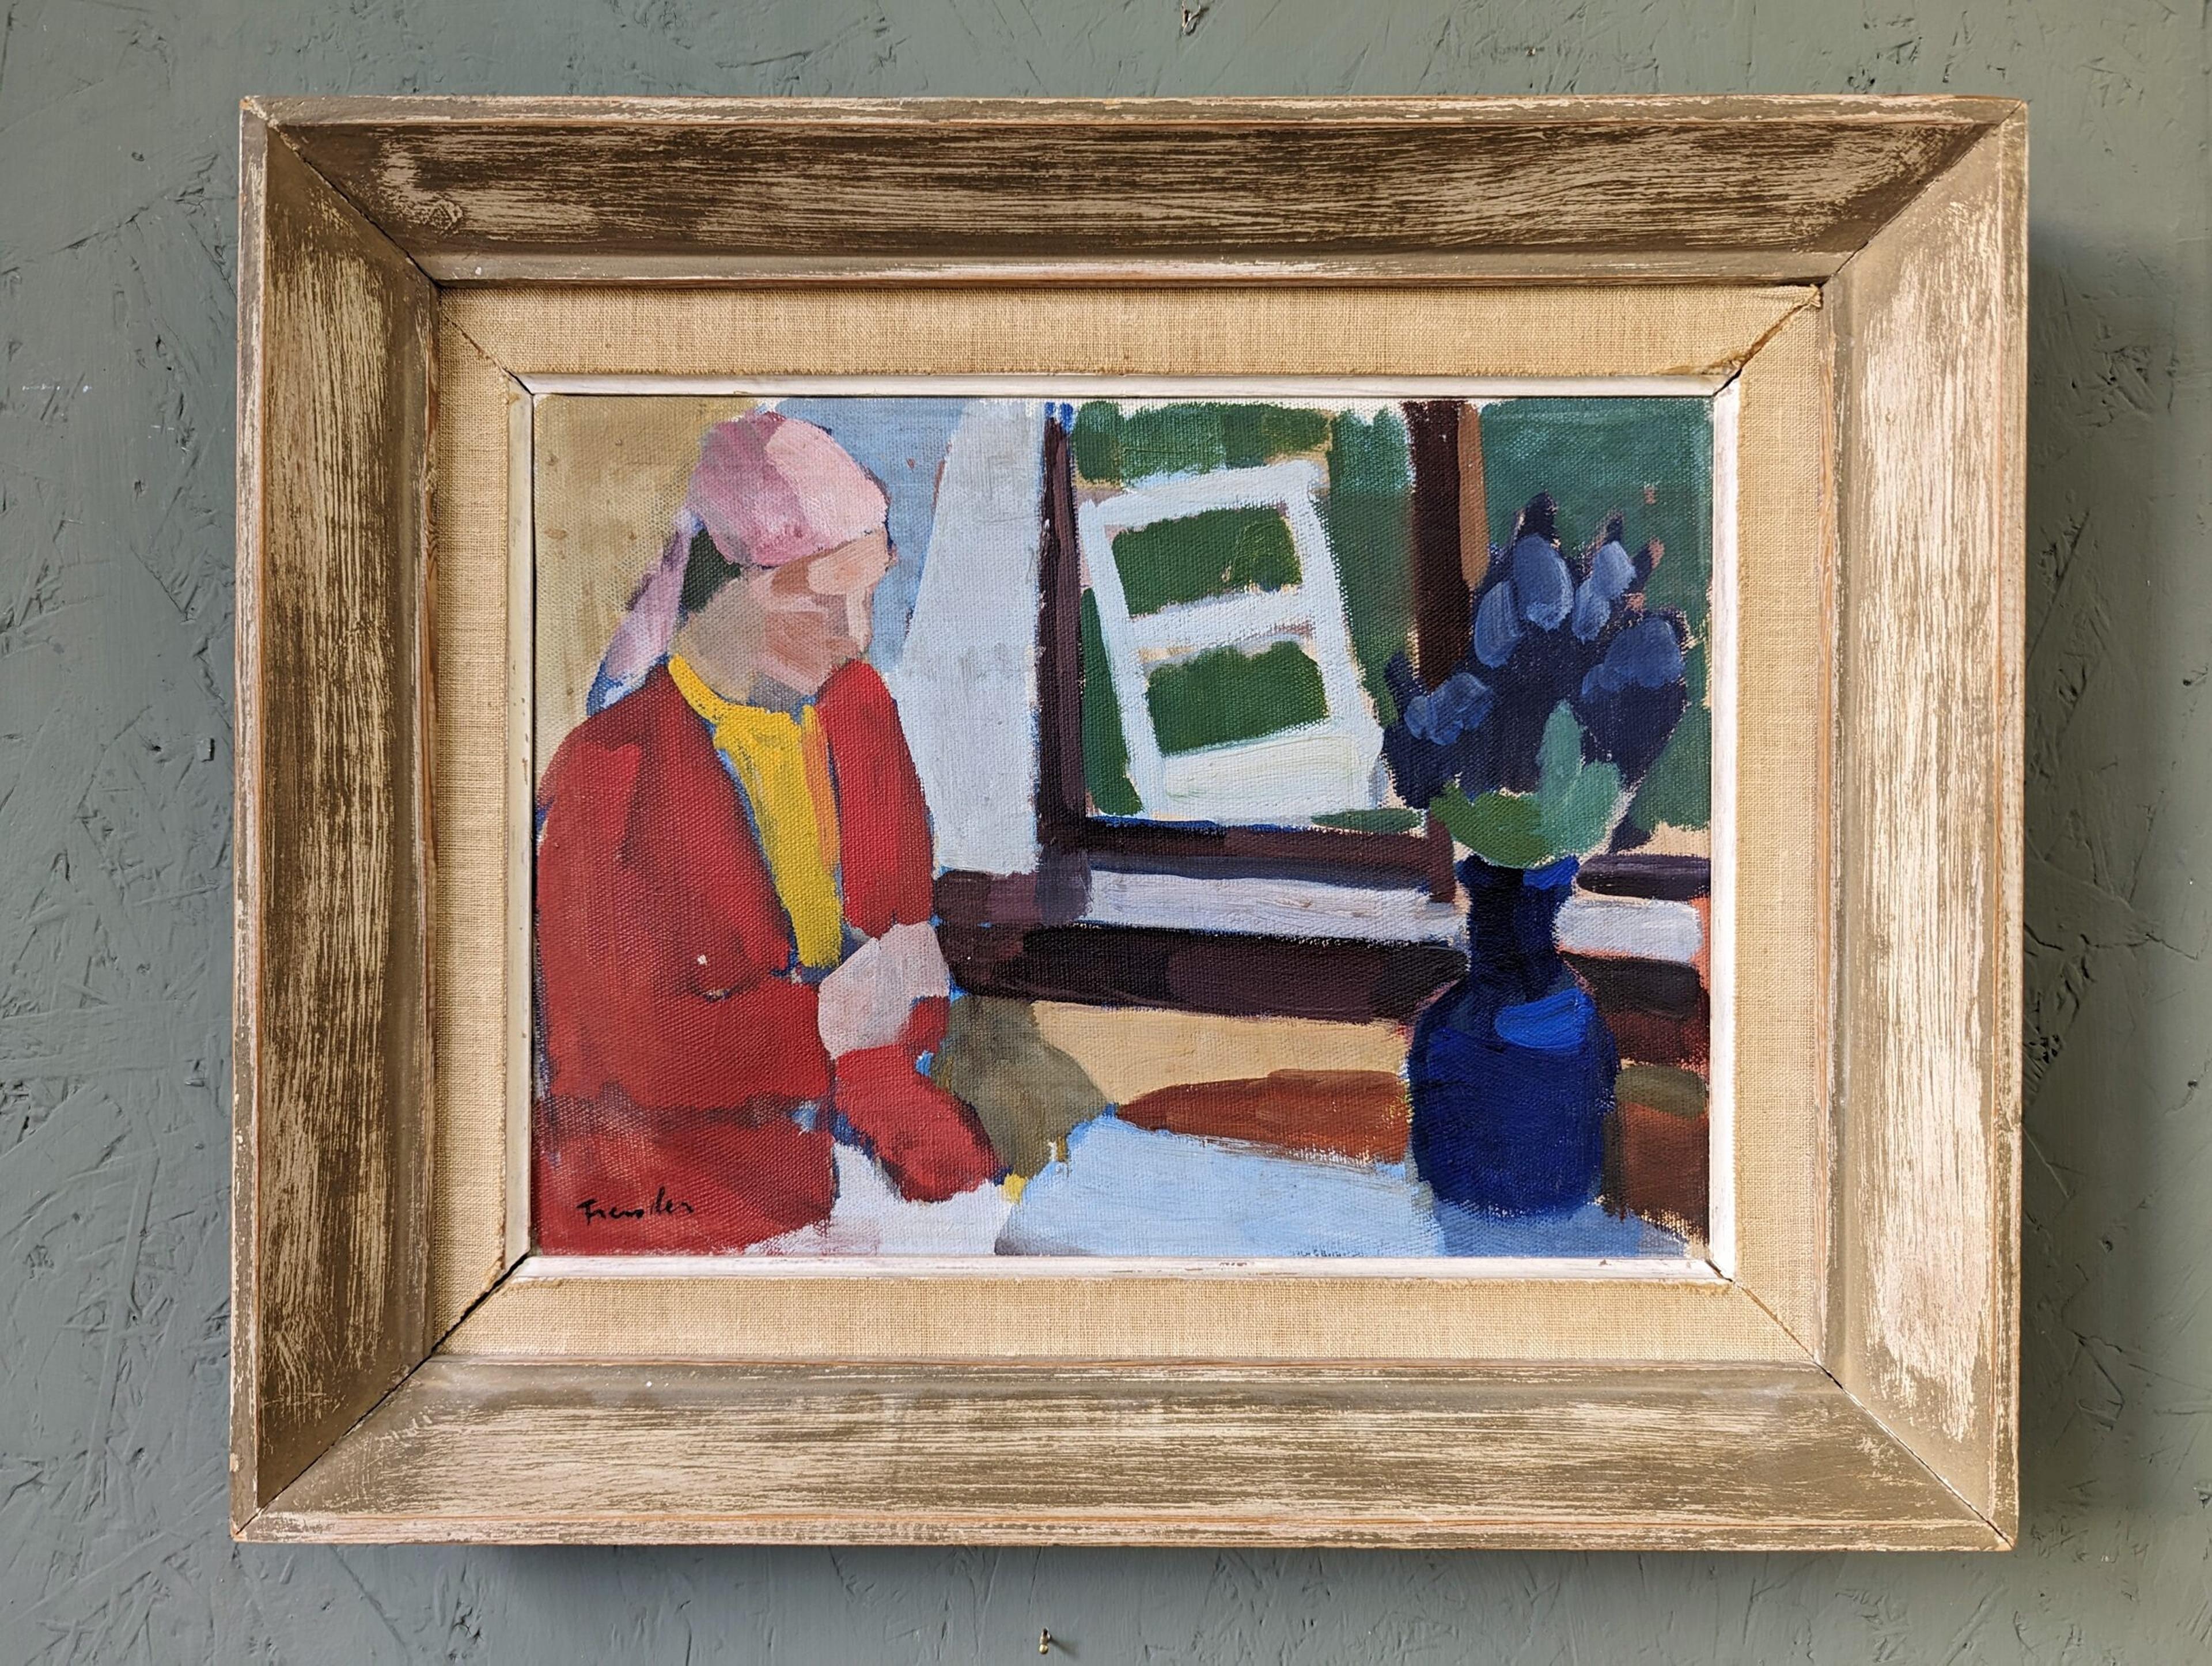 WINDOW SEAT
Size: 36 x 44.5 cm (including frame)
Oil on Canvas

A visually striking and soothing mid-century modernist style oil composition, executed in oil onto canvas.

The scene is set within an interior setting, where a female figure is seated